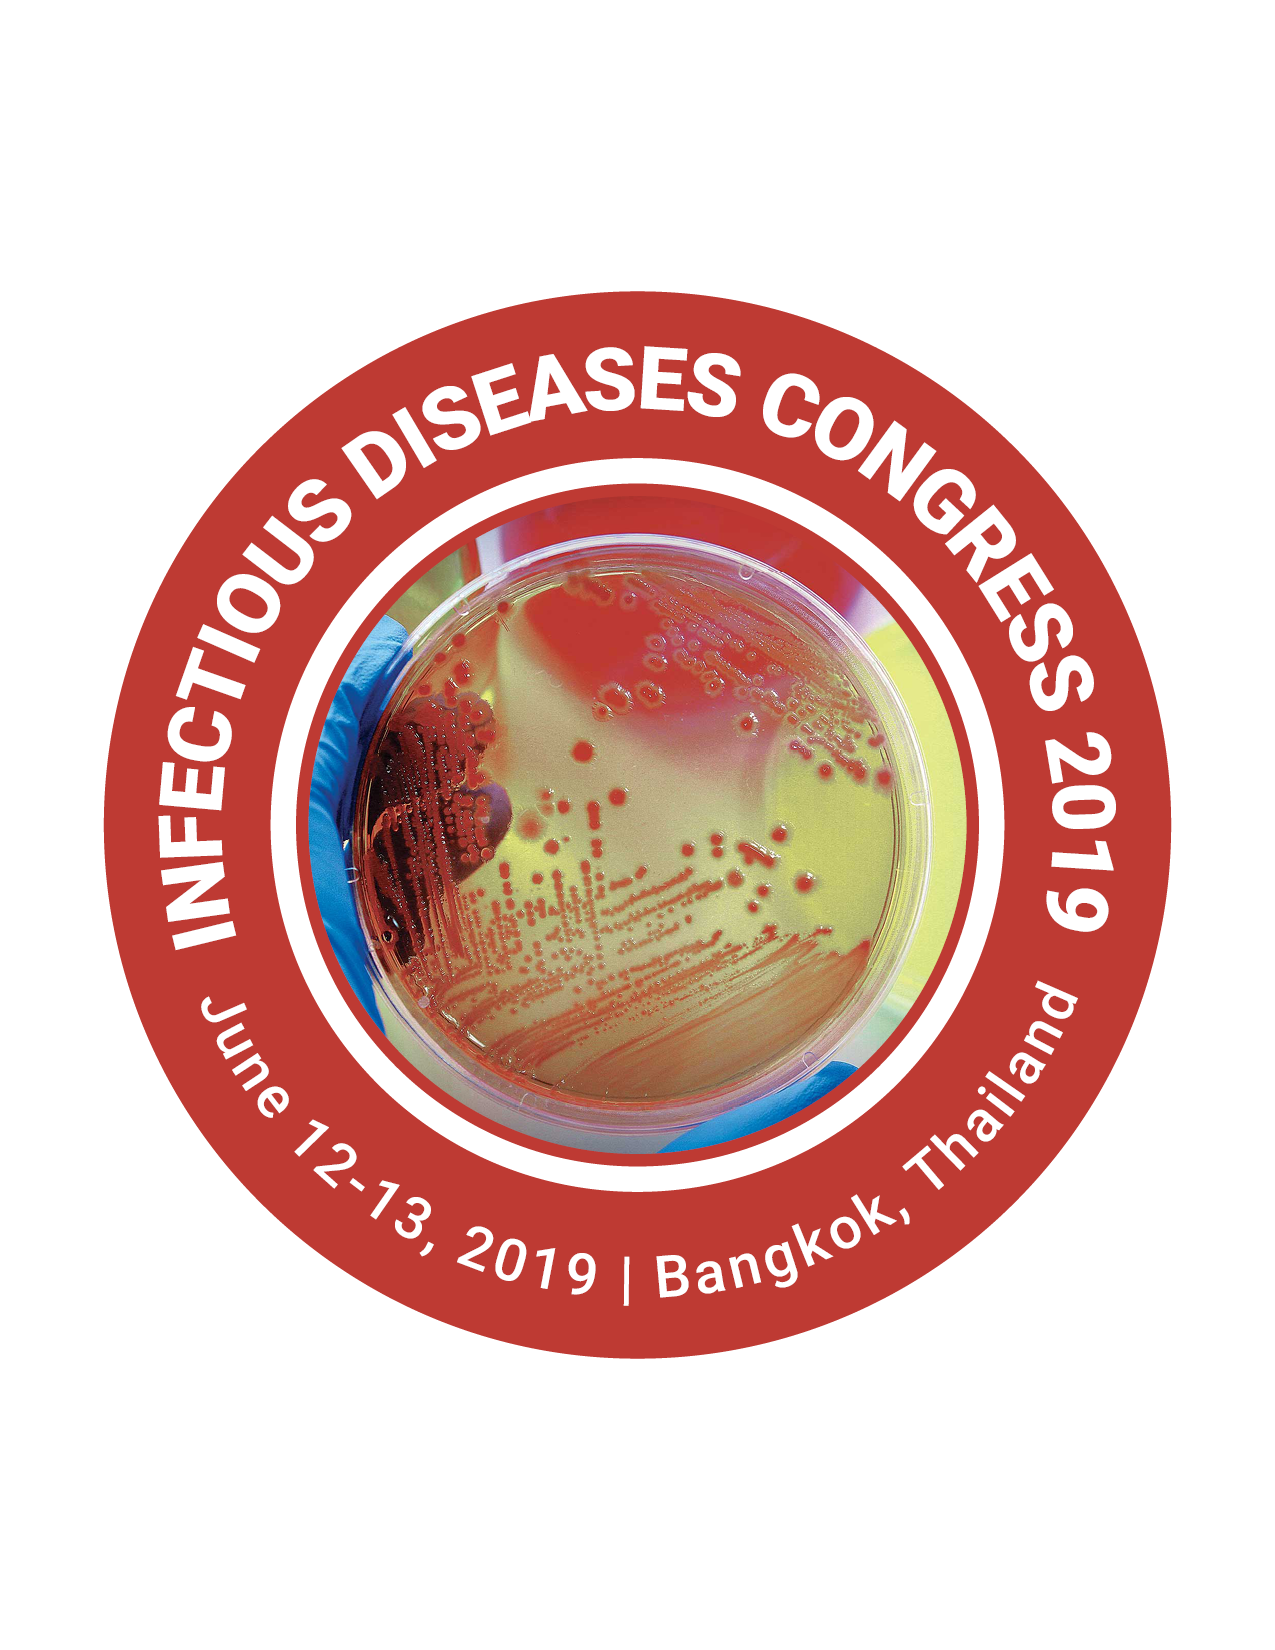 2nd Global Congress on Bacteriology and Infectious Diseases